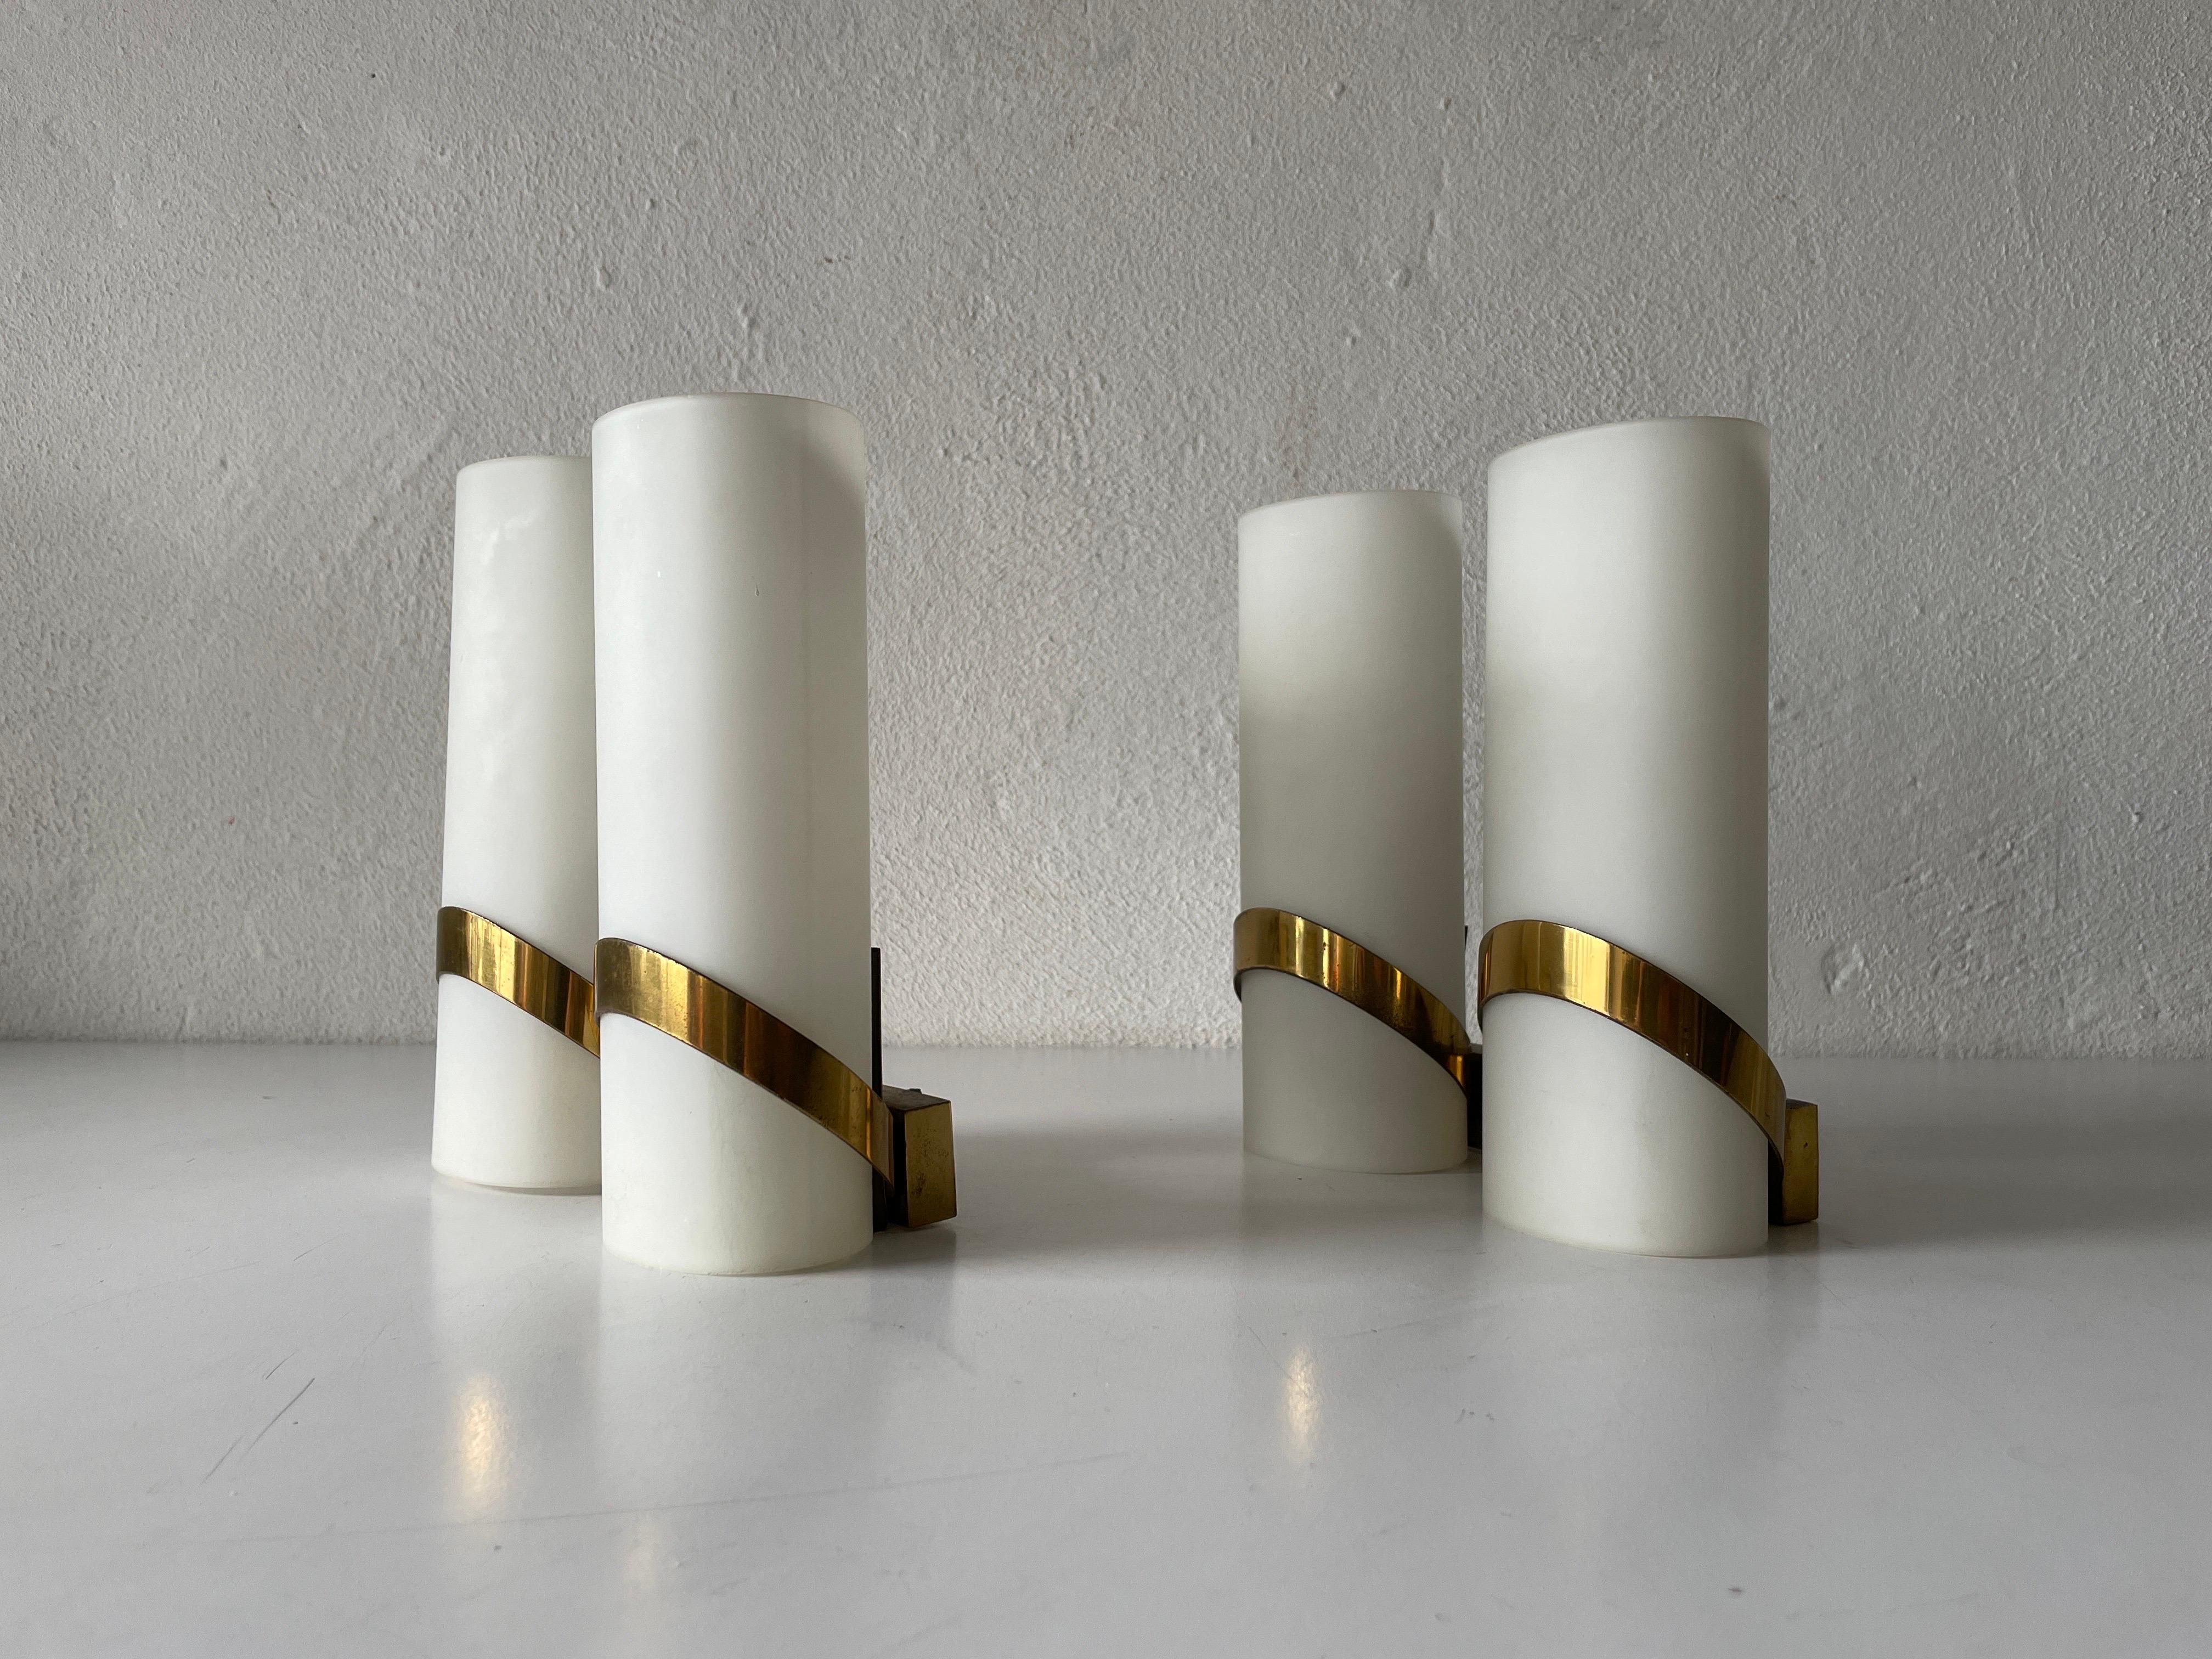 Mid-century pair of sconces by Stilnovo, 1950s, Italy

Very elegant and Minimalist wall lamps

Brushed satin glass diffusers and brass.

Lamp is in very good condition.
These lamps works with E14 standard light bulbs. 
Wired and suitable to